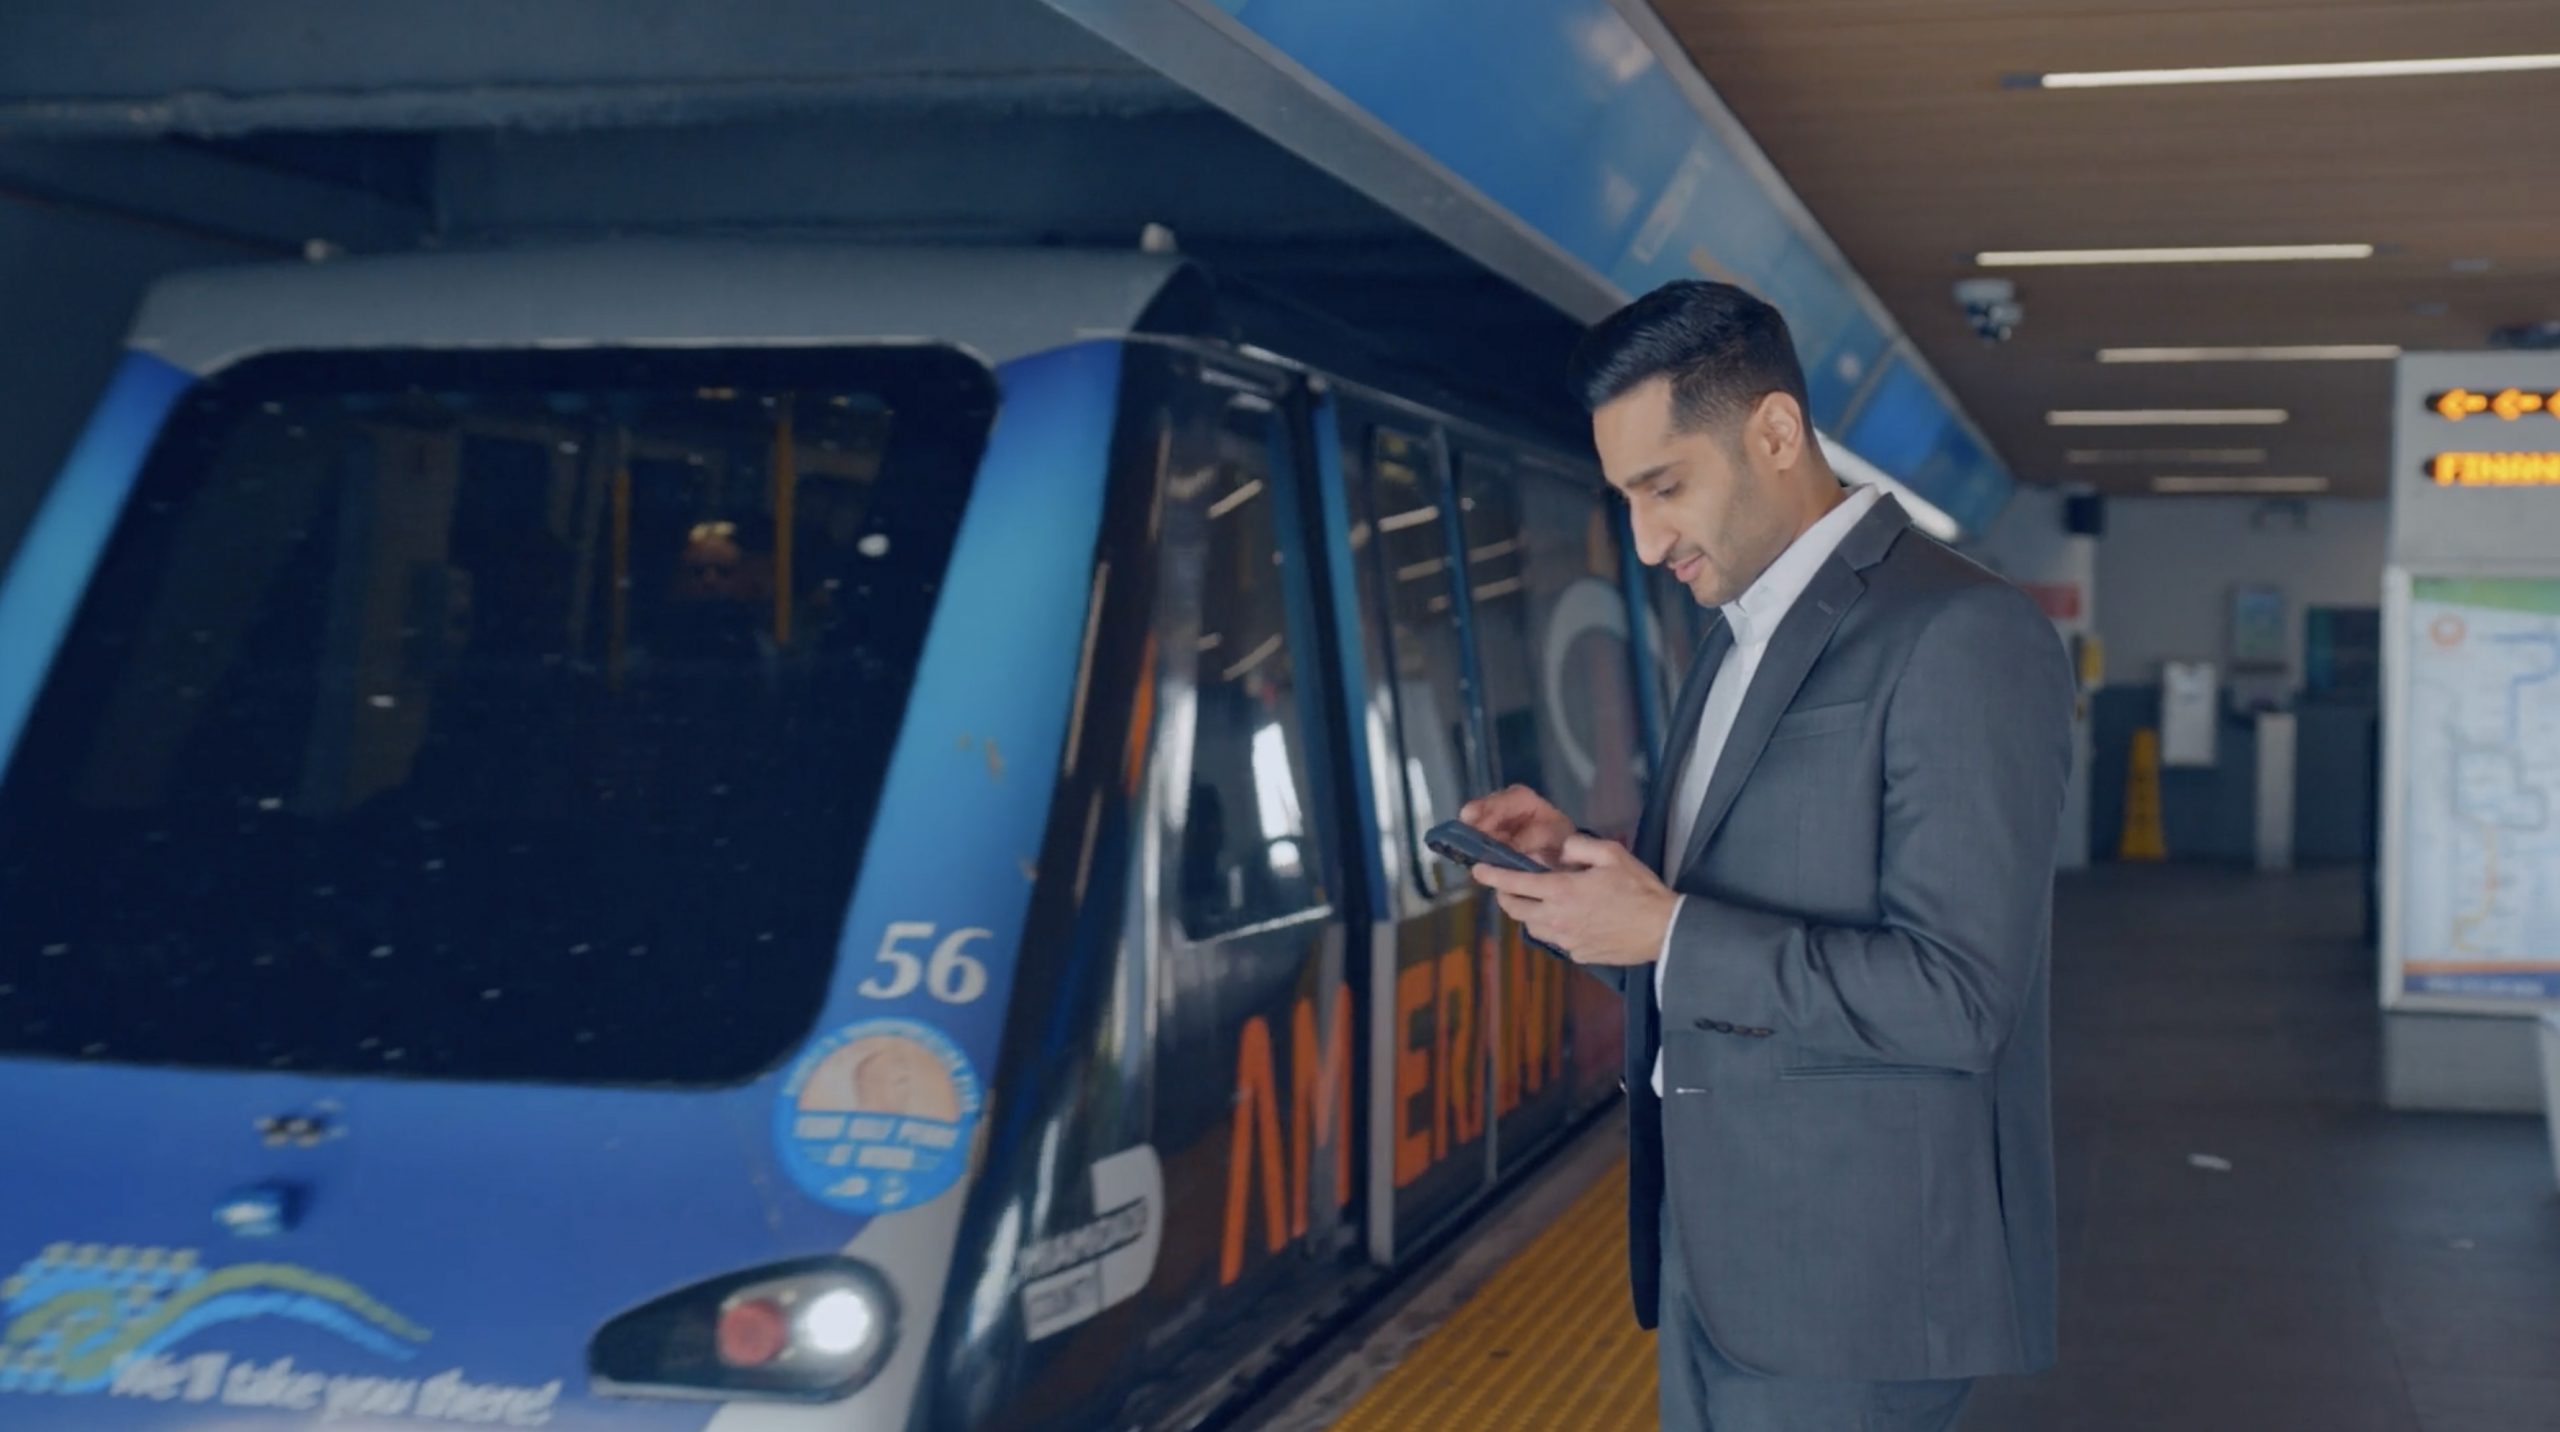 Man in Miami waiting for the public transit tram using iPhone with AT&T 5G network